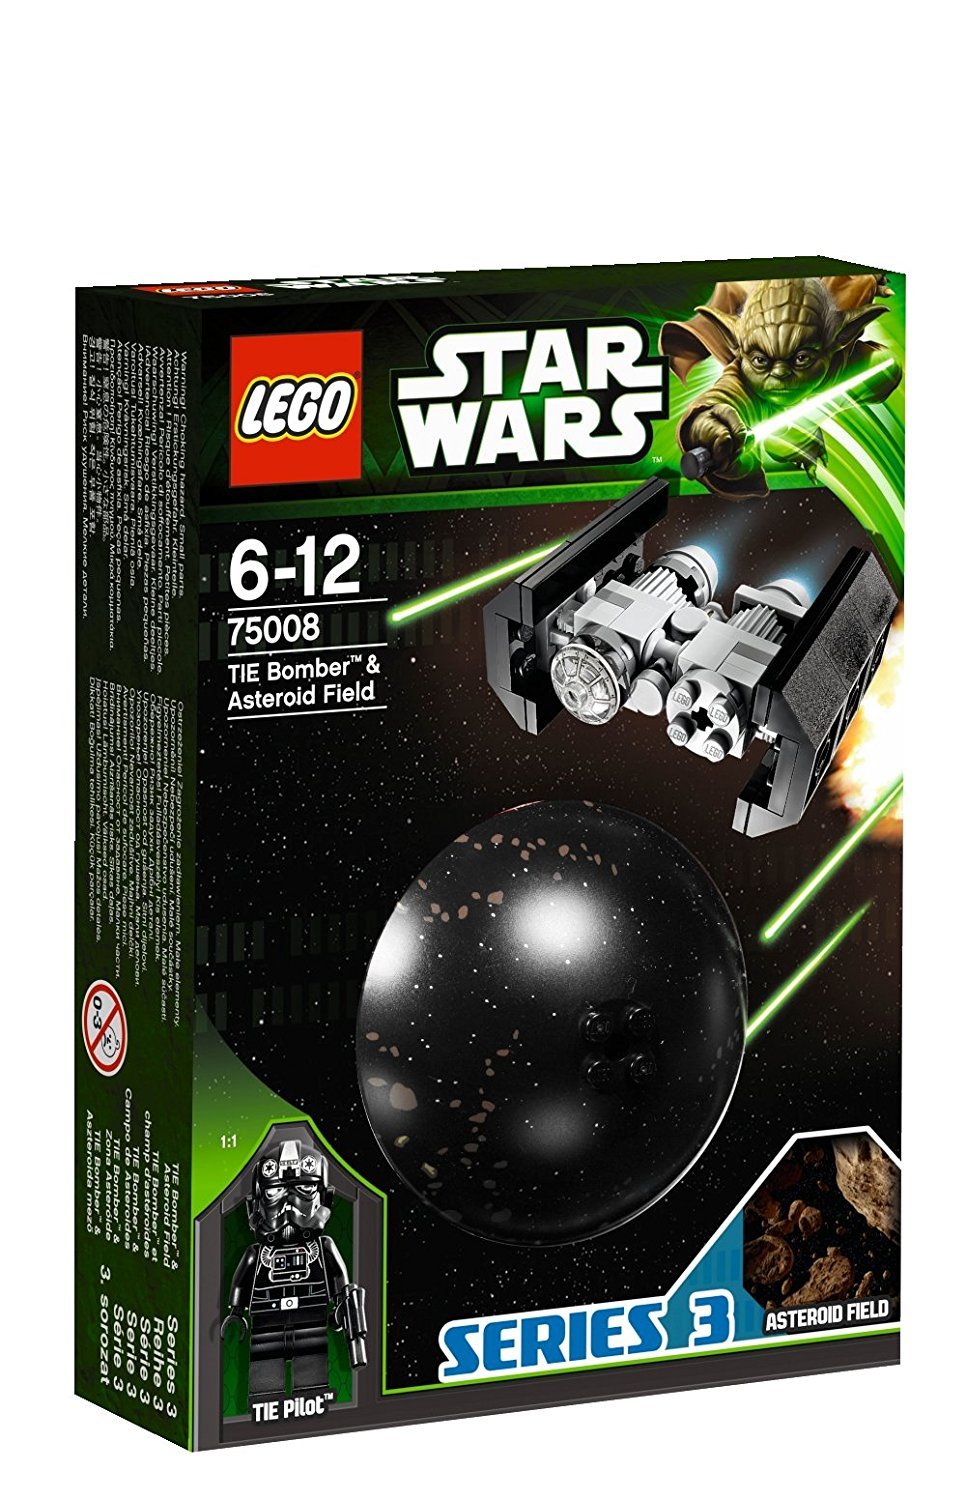 Lego Star Wars Planets Tie Bomber Aster Iod Field